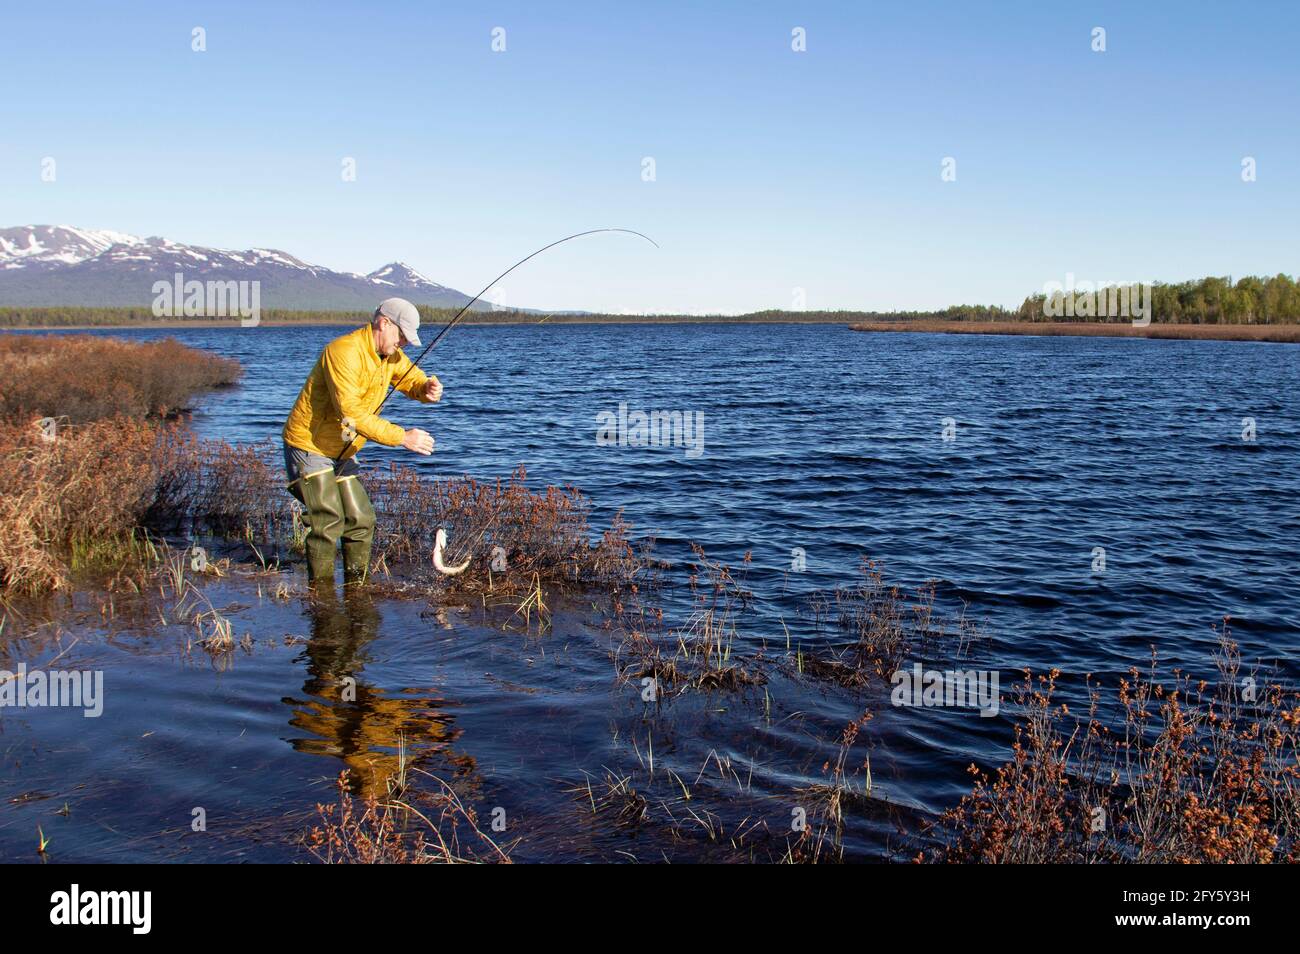 An angler brings in a small northern pike caught in a remote lake in Southcentral Alaska's Susitna Valley. Stock Photo